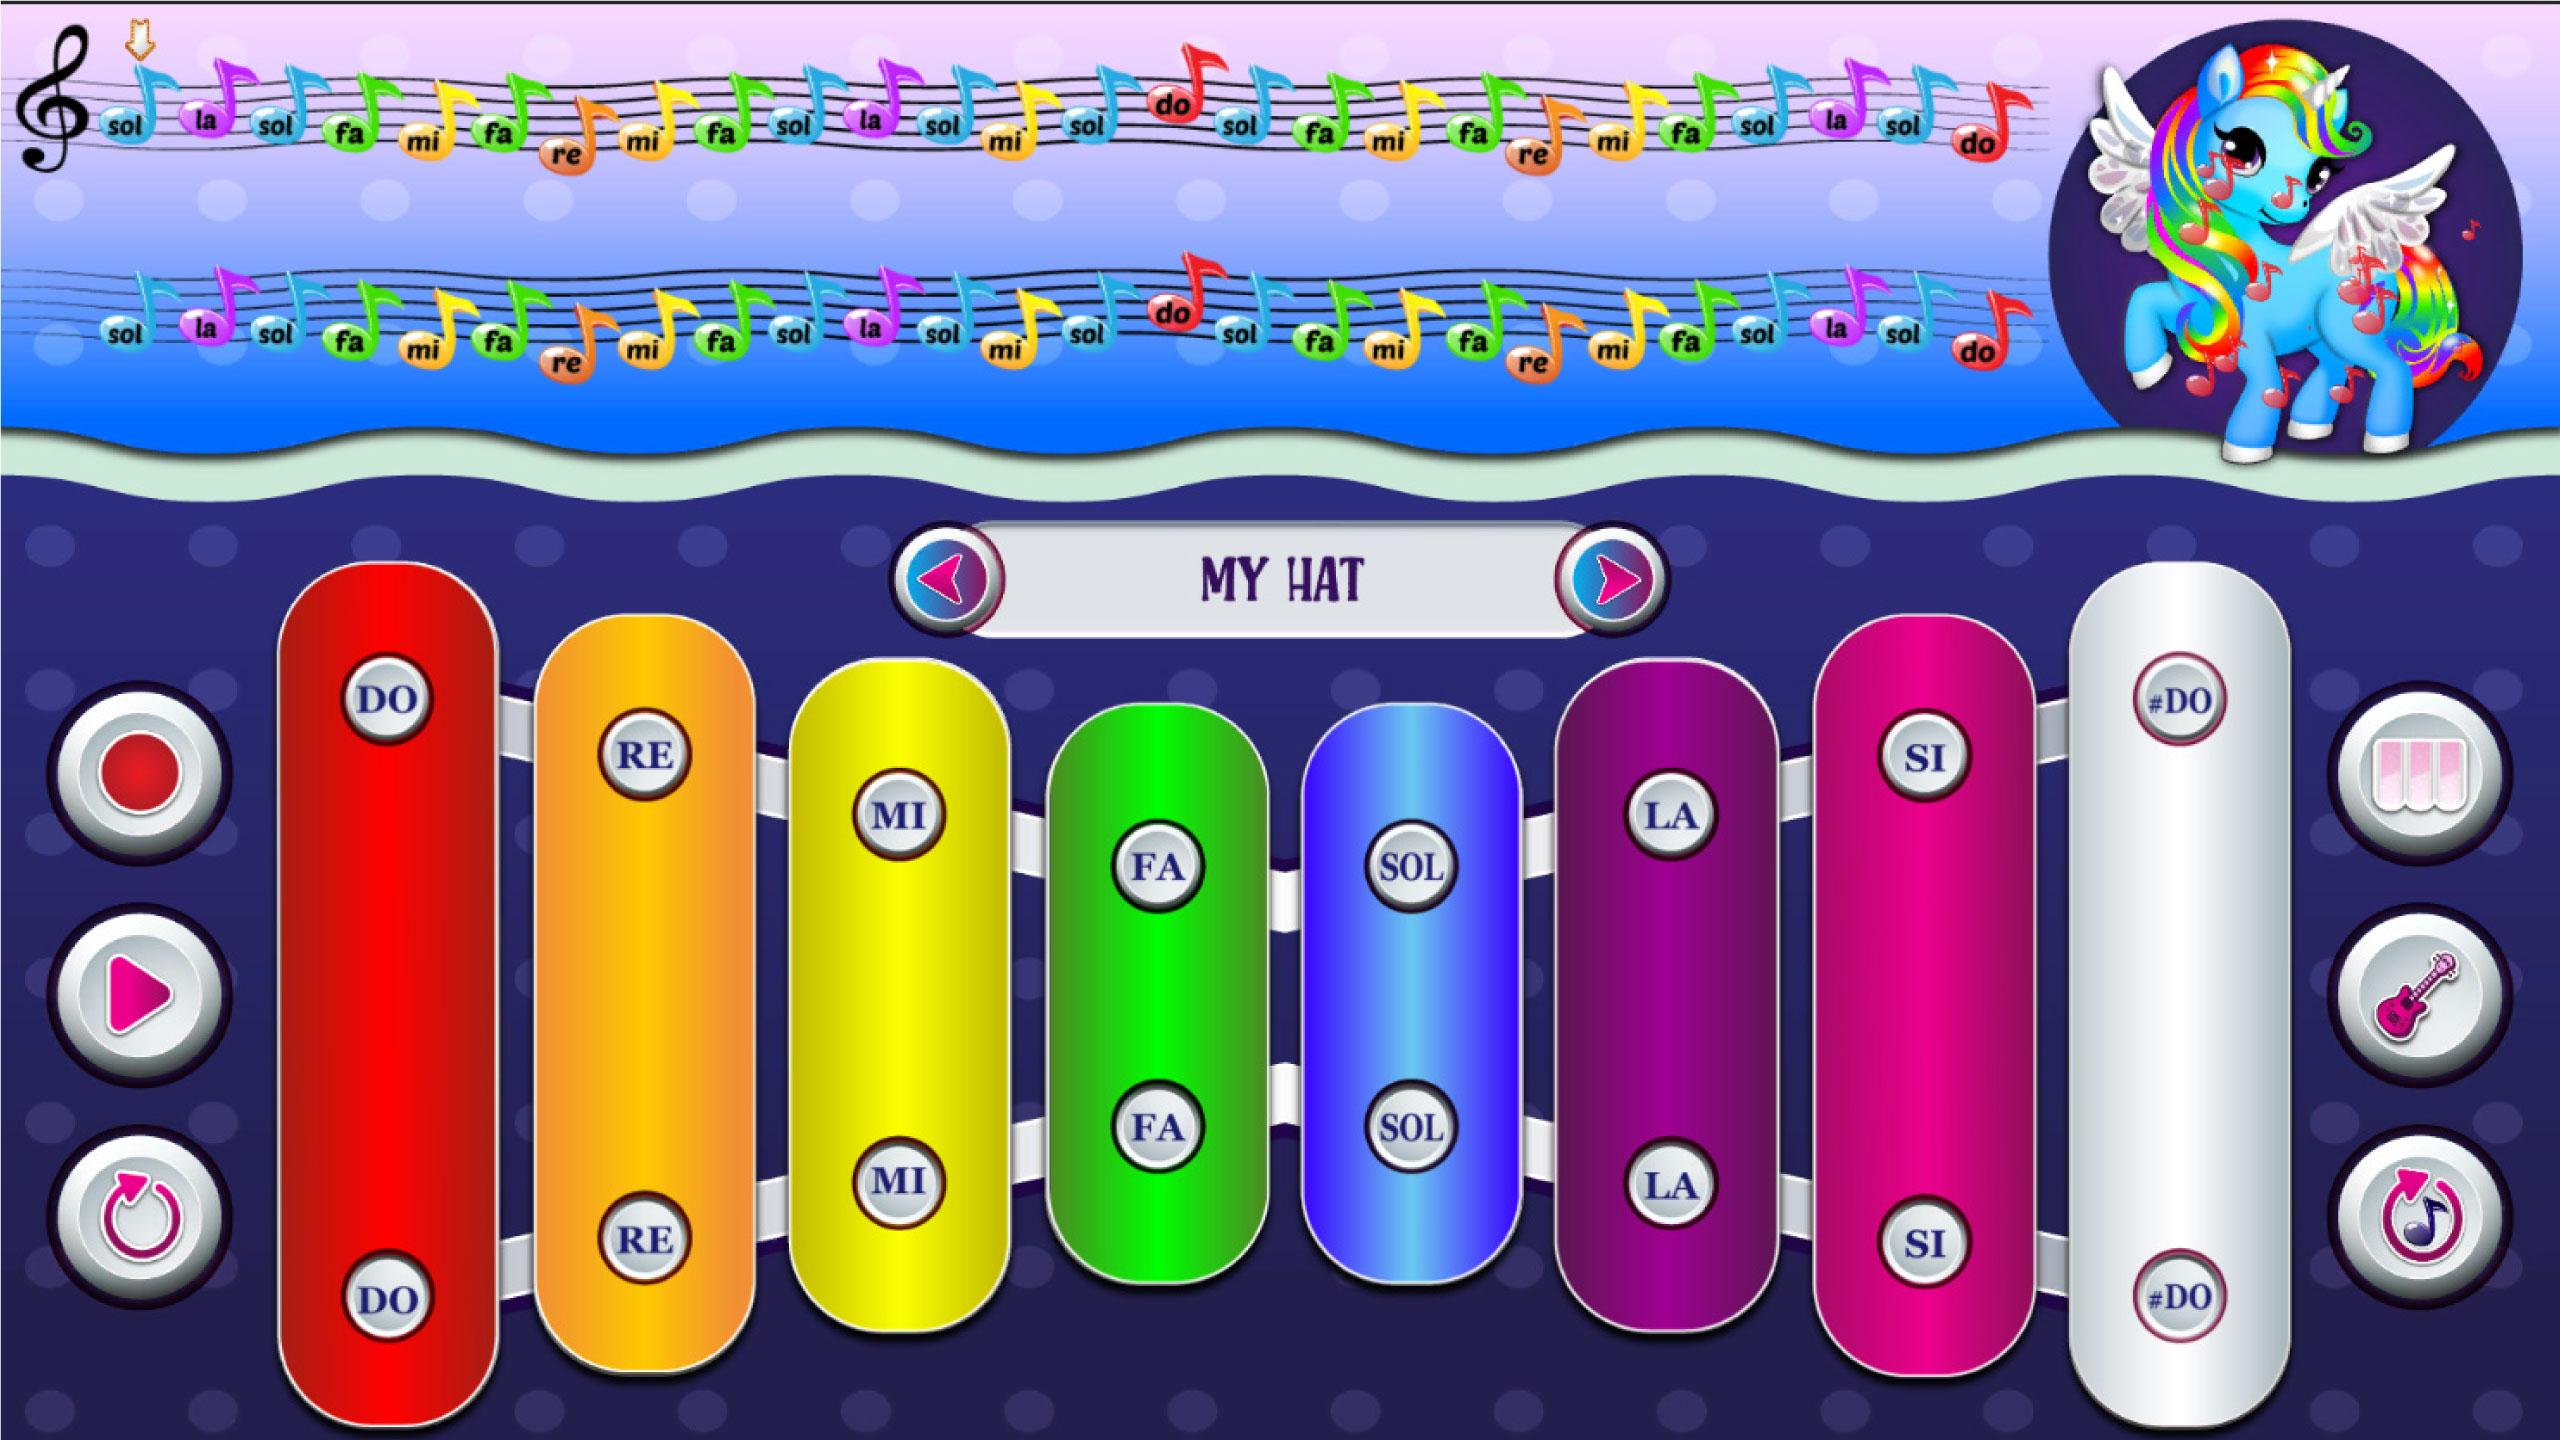 My Colorful Litle Pony Instrument - Piano 2.0 Screenshot 19